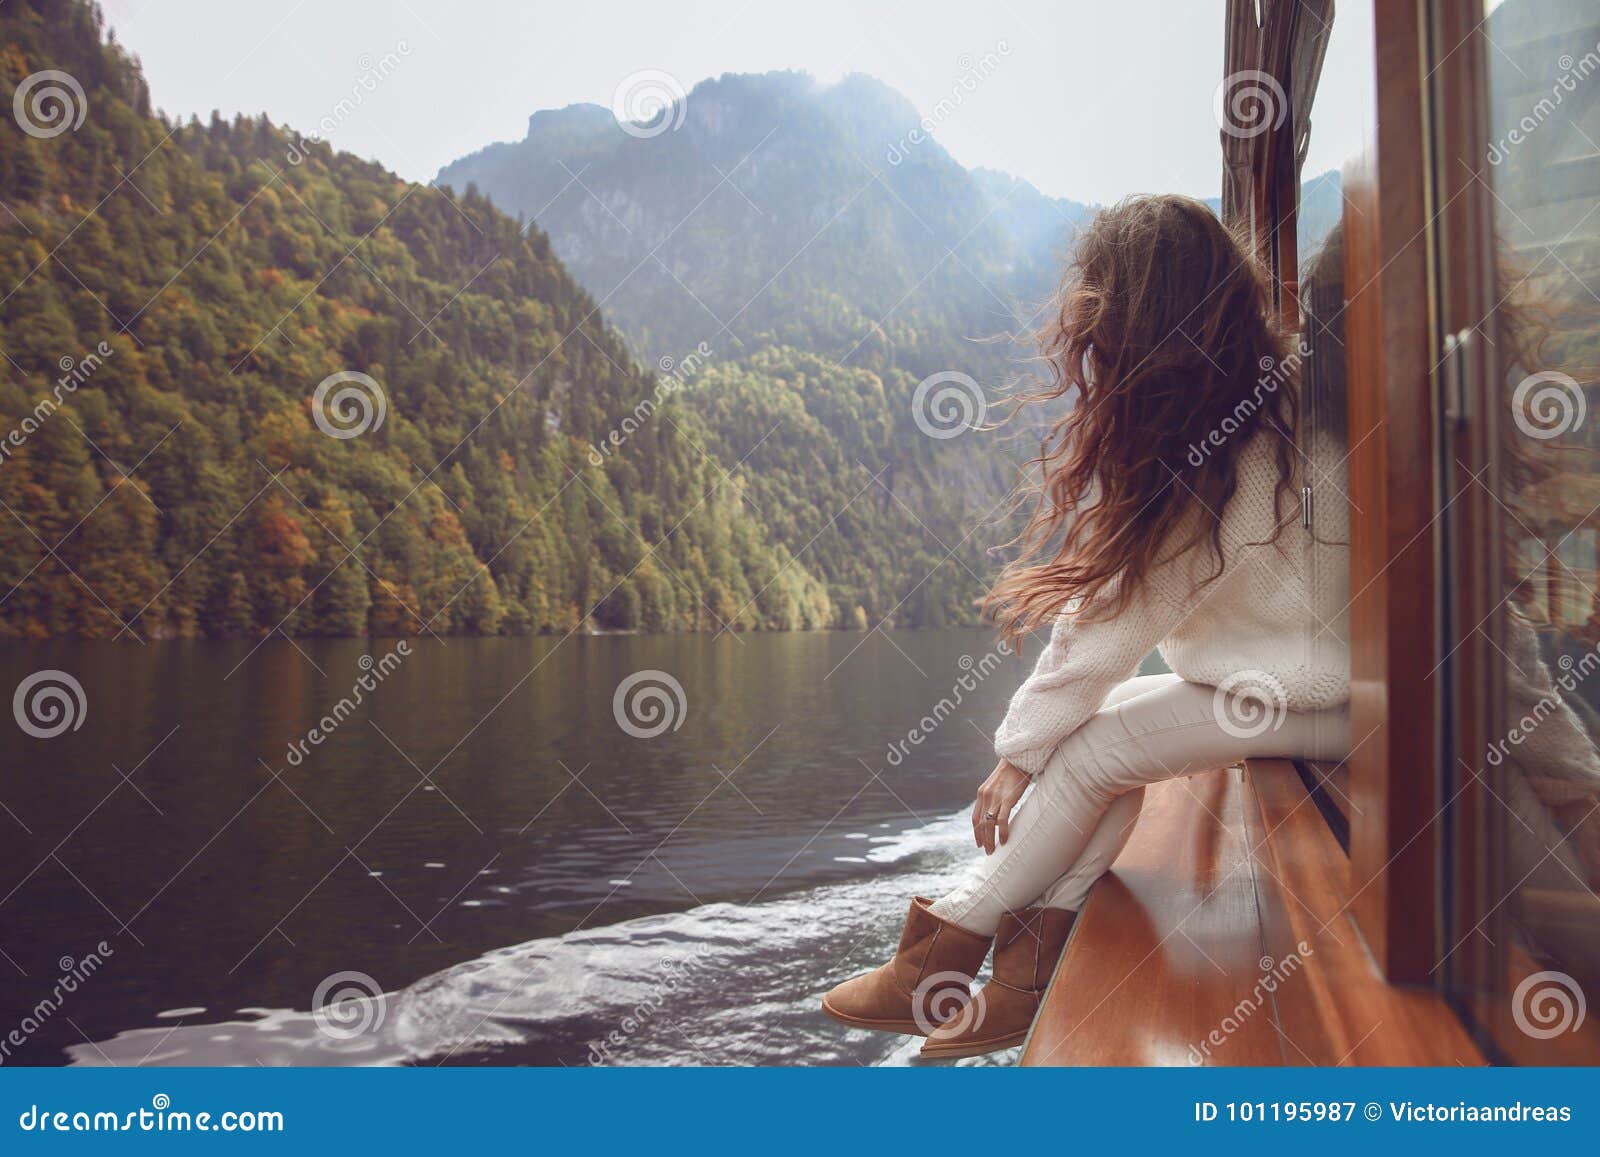 woman tourist going on boat in konigssee lake, berchtesgaden, ge